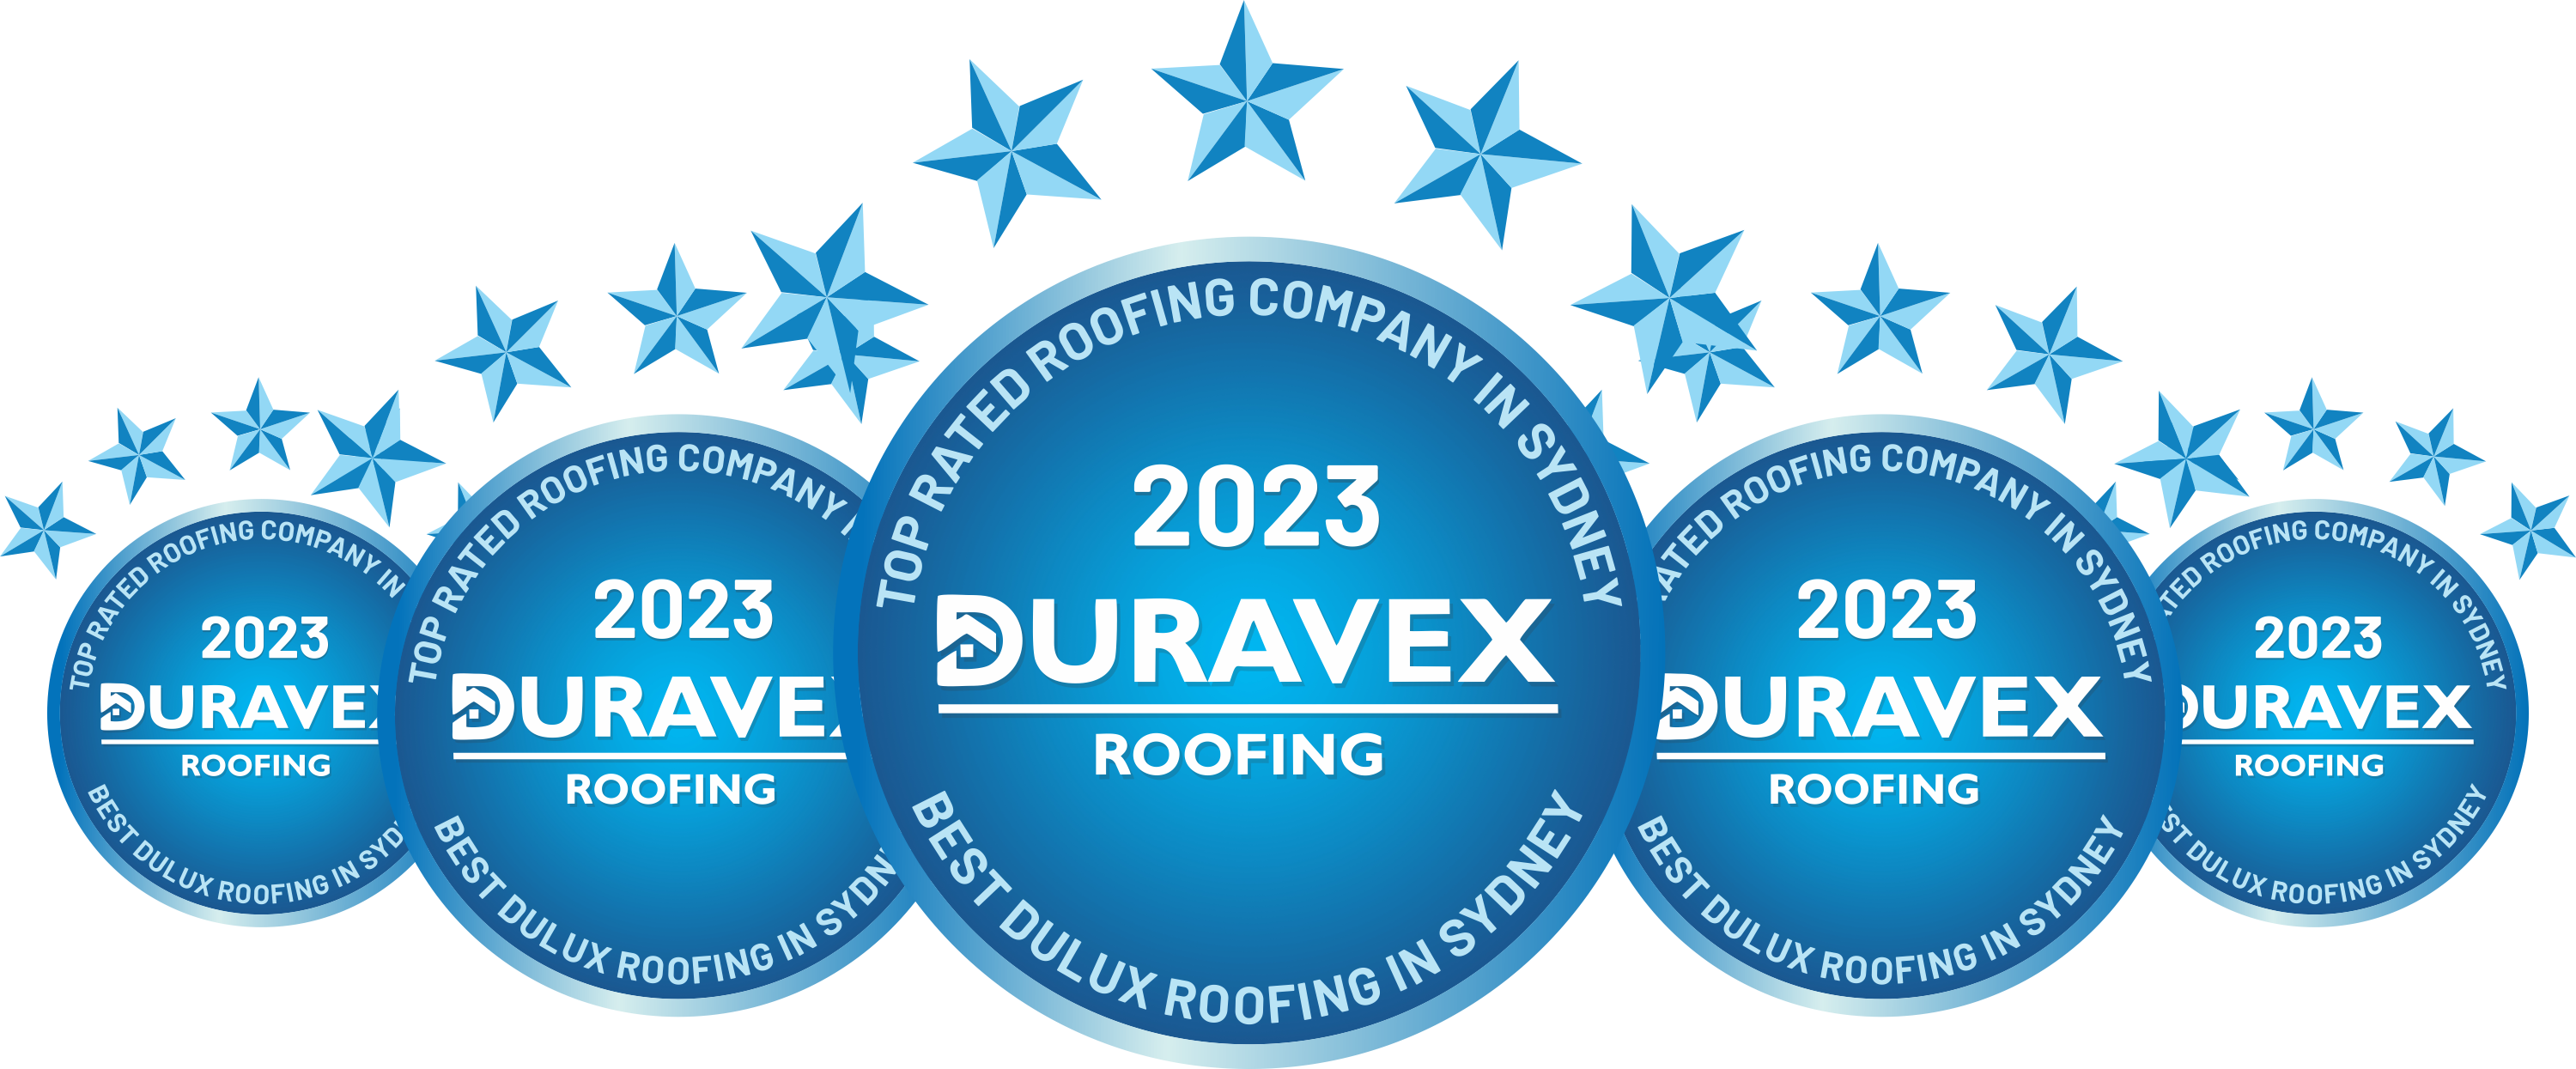 Welcome to Duravex Roofing - Dulux Acratex Accredited